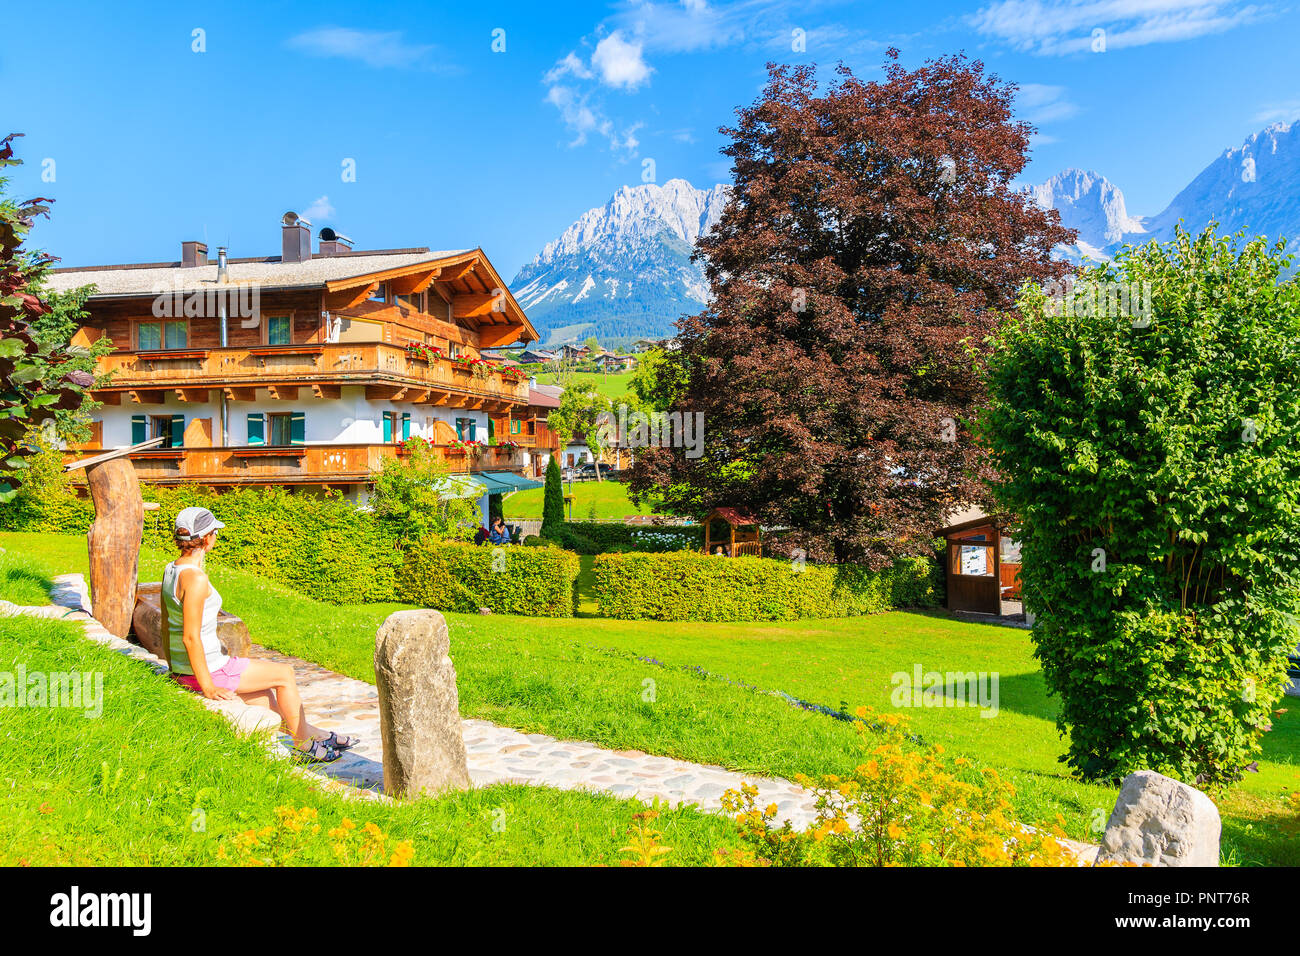 Typical wooden alpine house against Alps mountains background on green meadow in Going am Wilden Kaiser village on sunny summer day, Tyrol, Austria Stock Photo